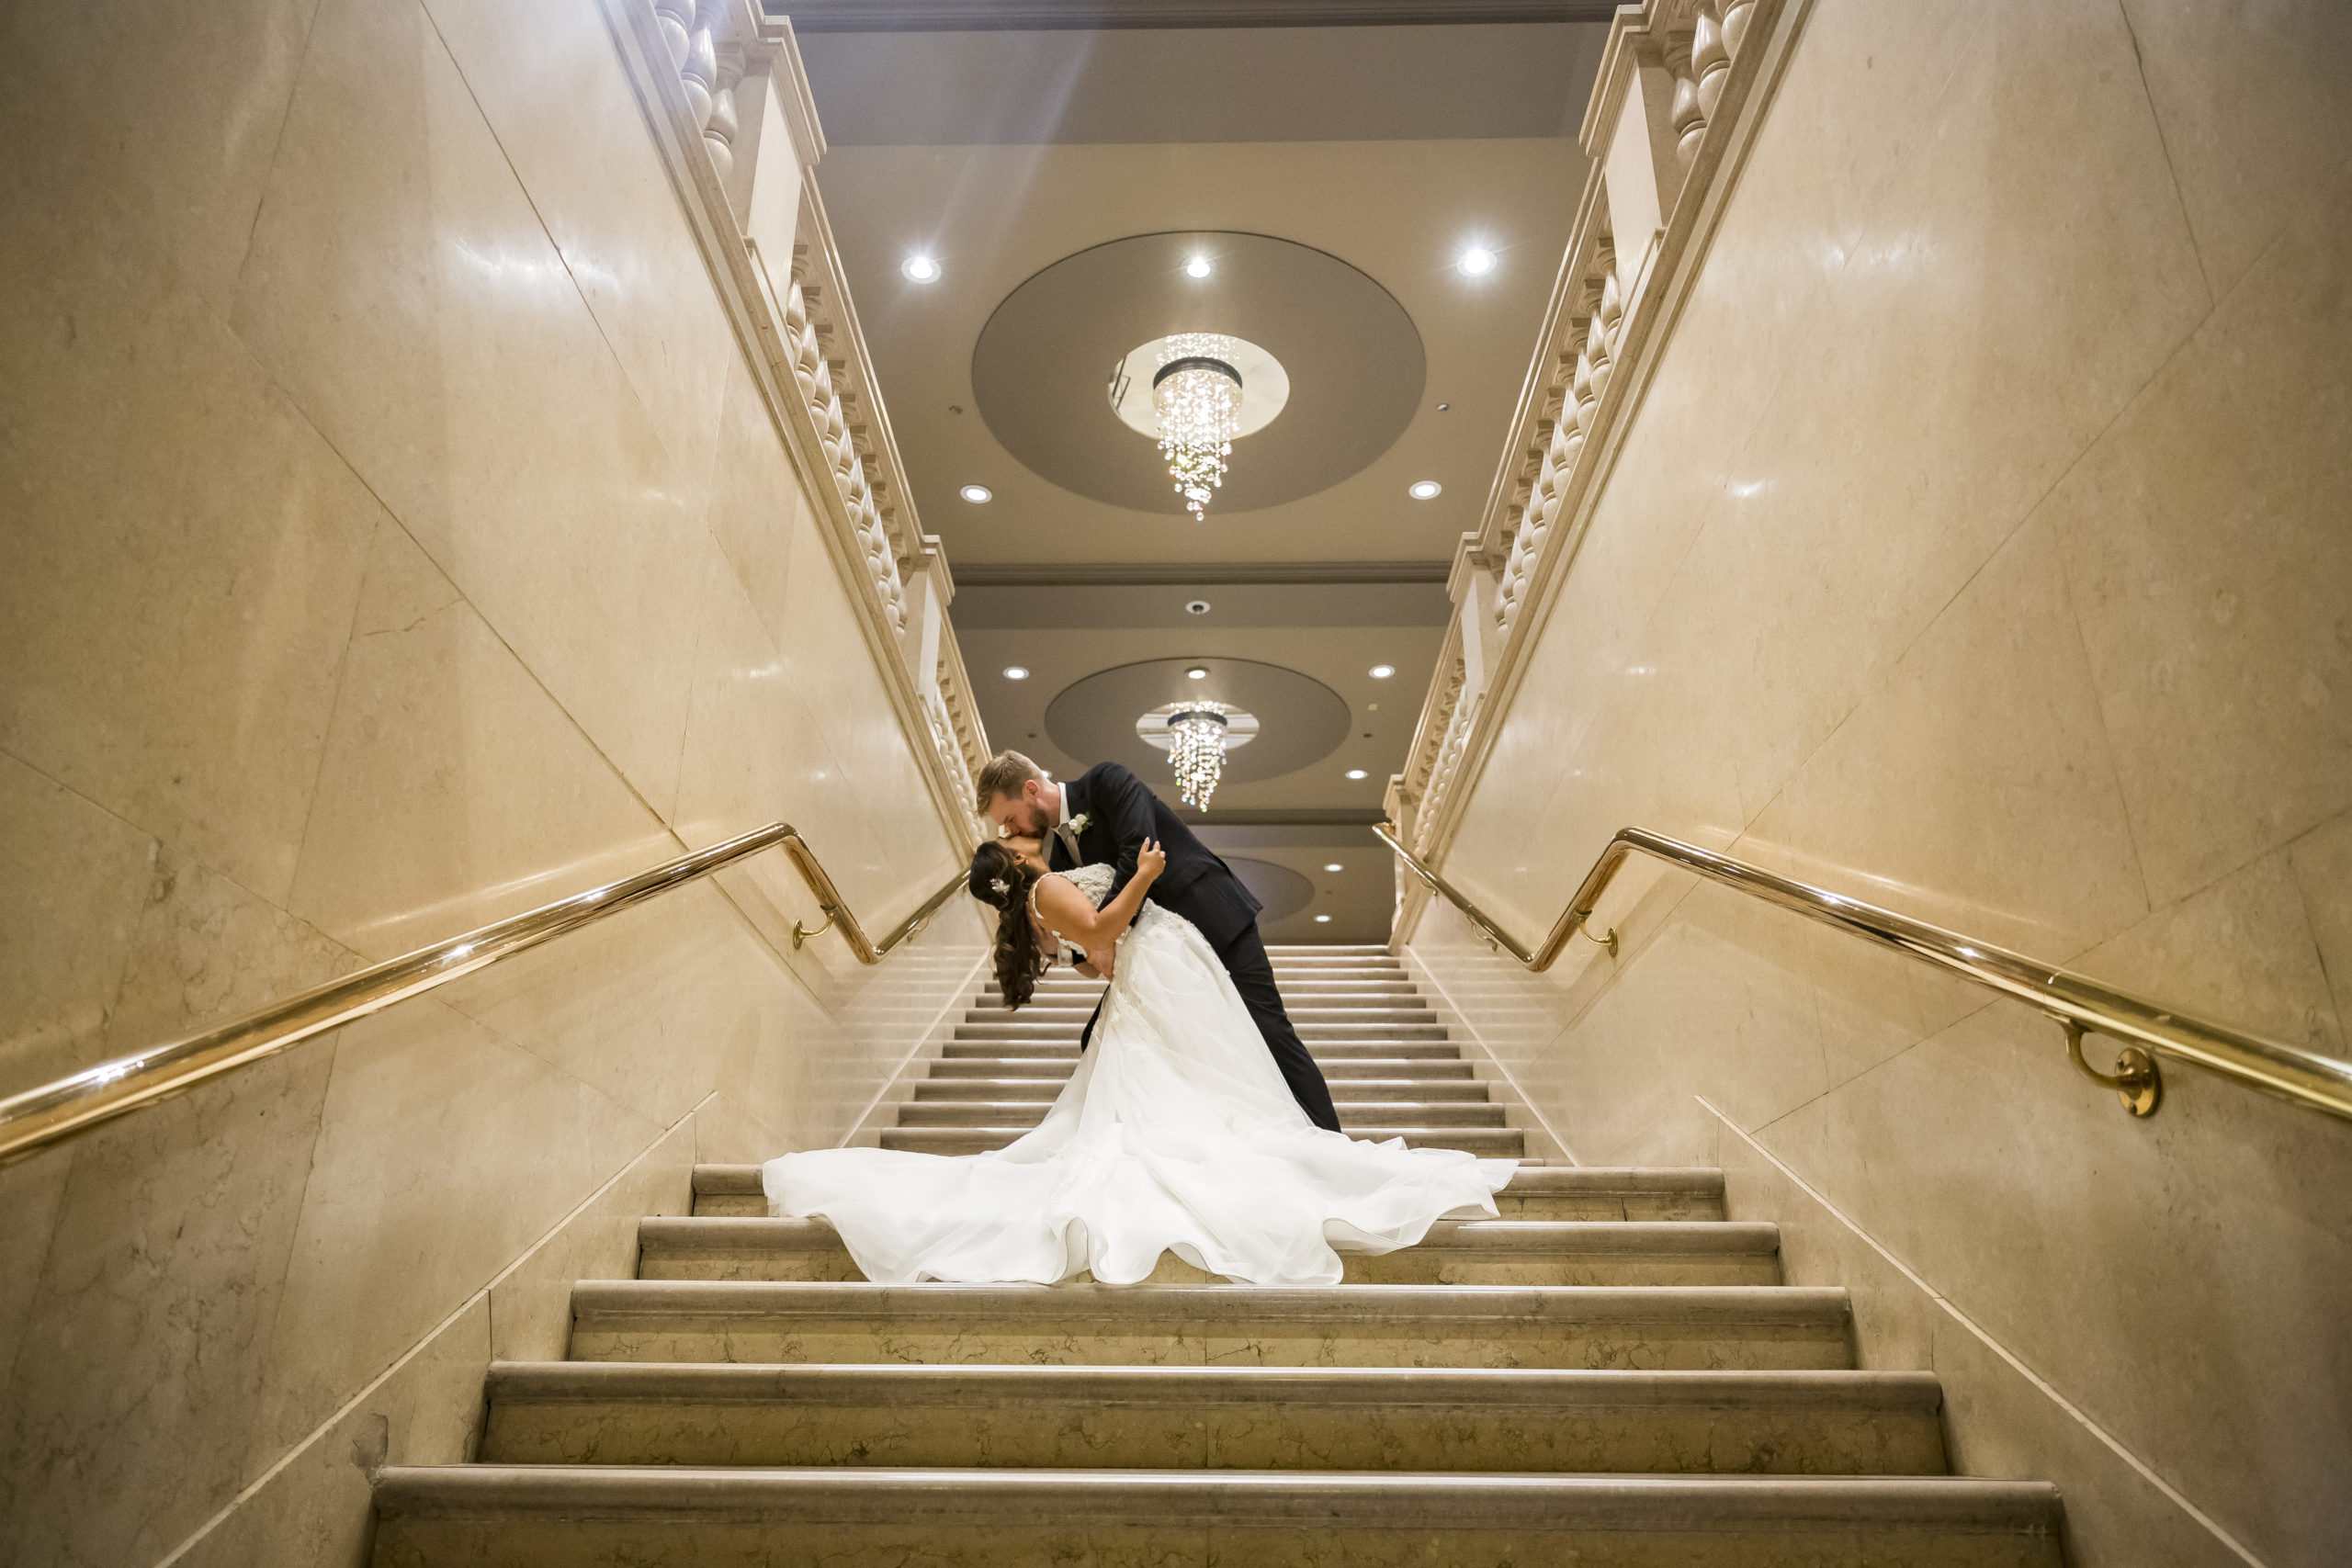 A bride and groom kiss on the grand staircase during their One King West wedding